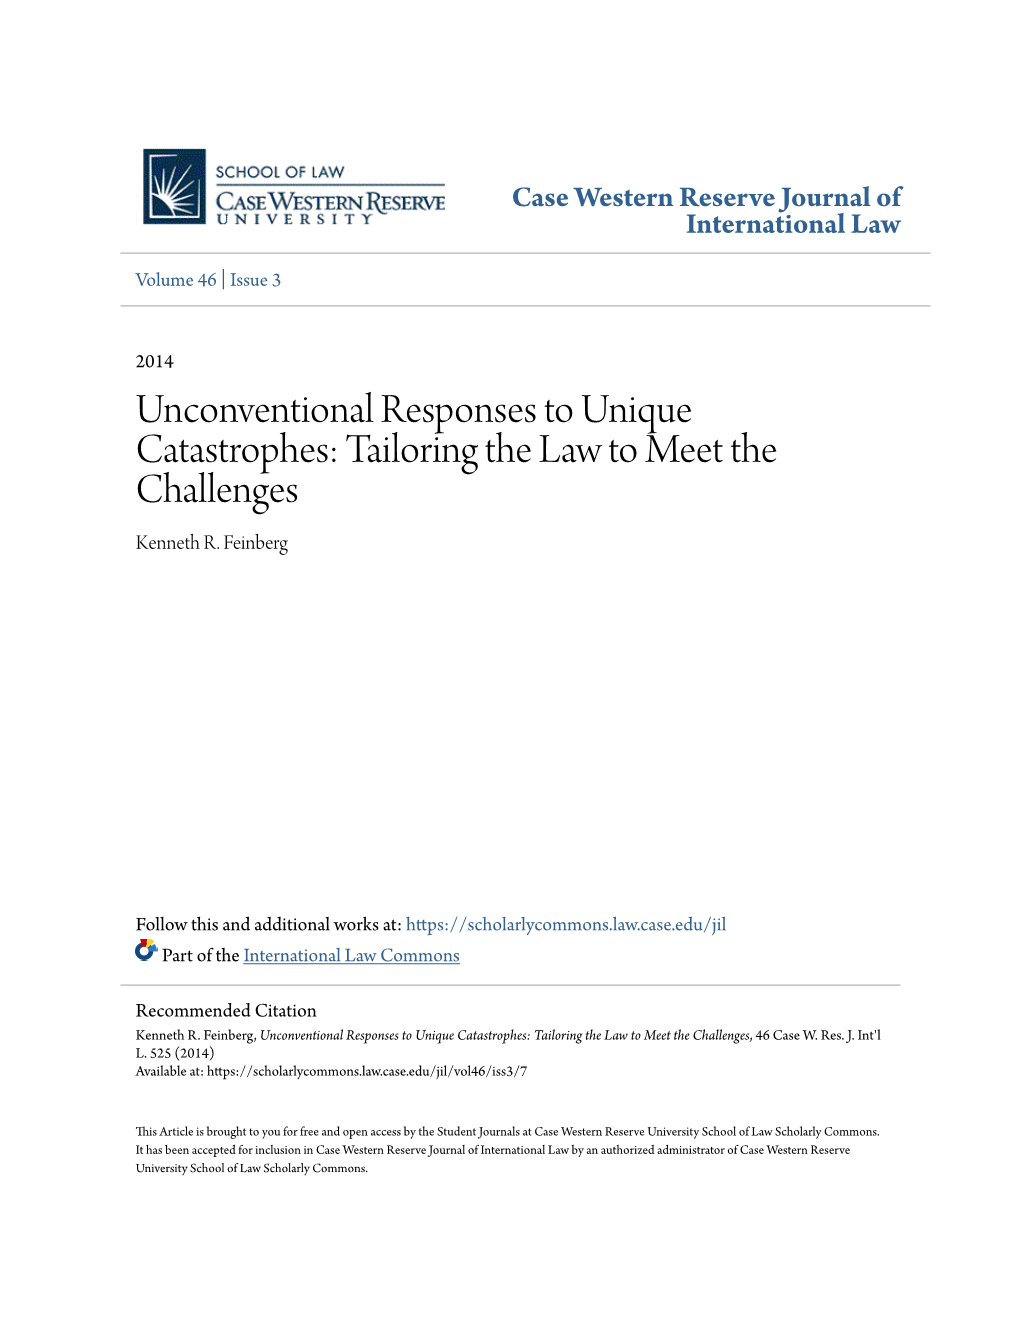 Unconventional Responses to Unique Catastrophes: Tailoring the Law to Meet the Challenges Kenneth R